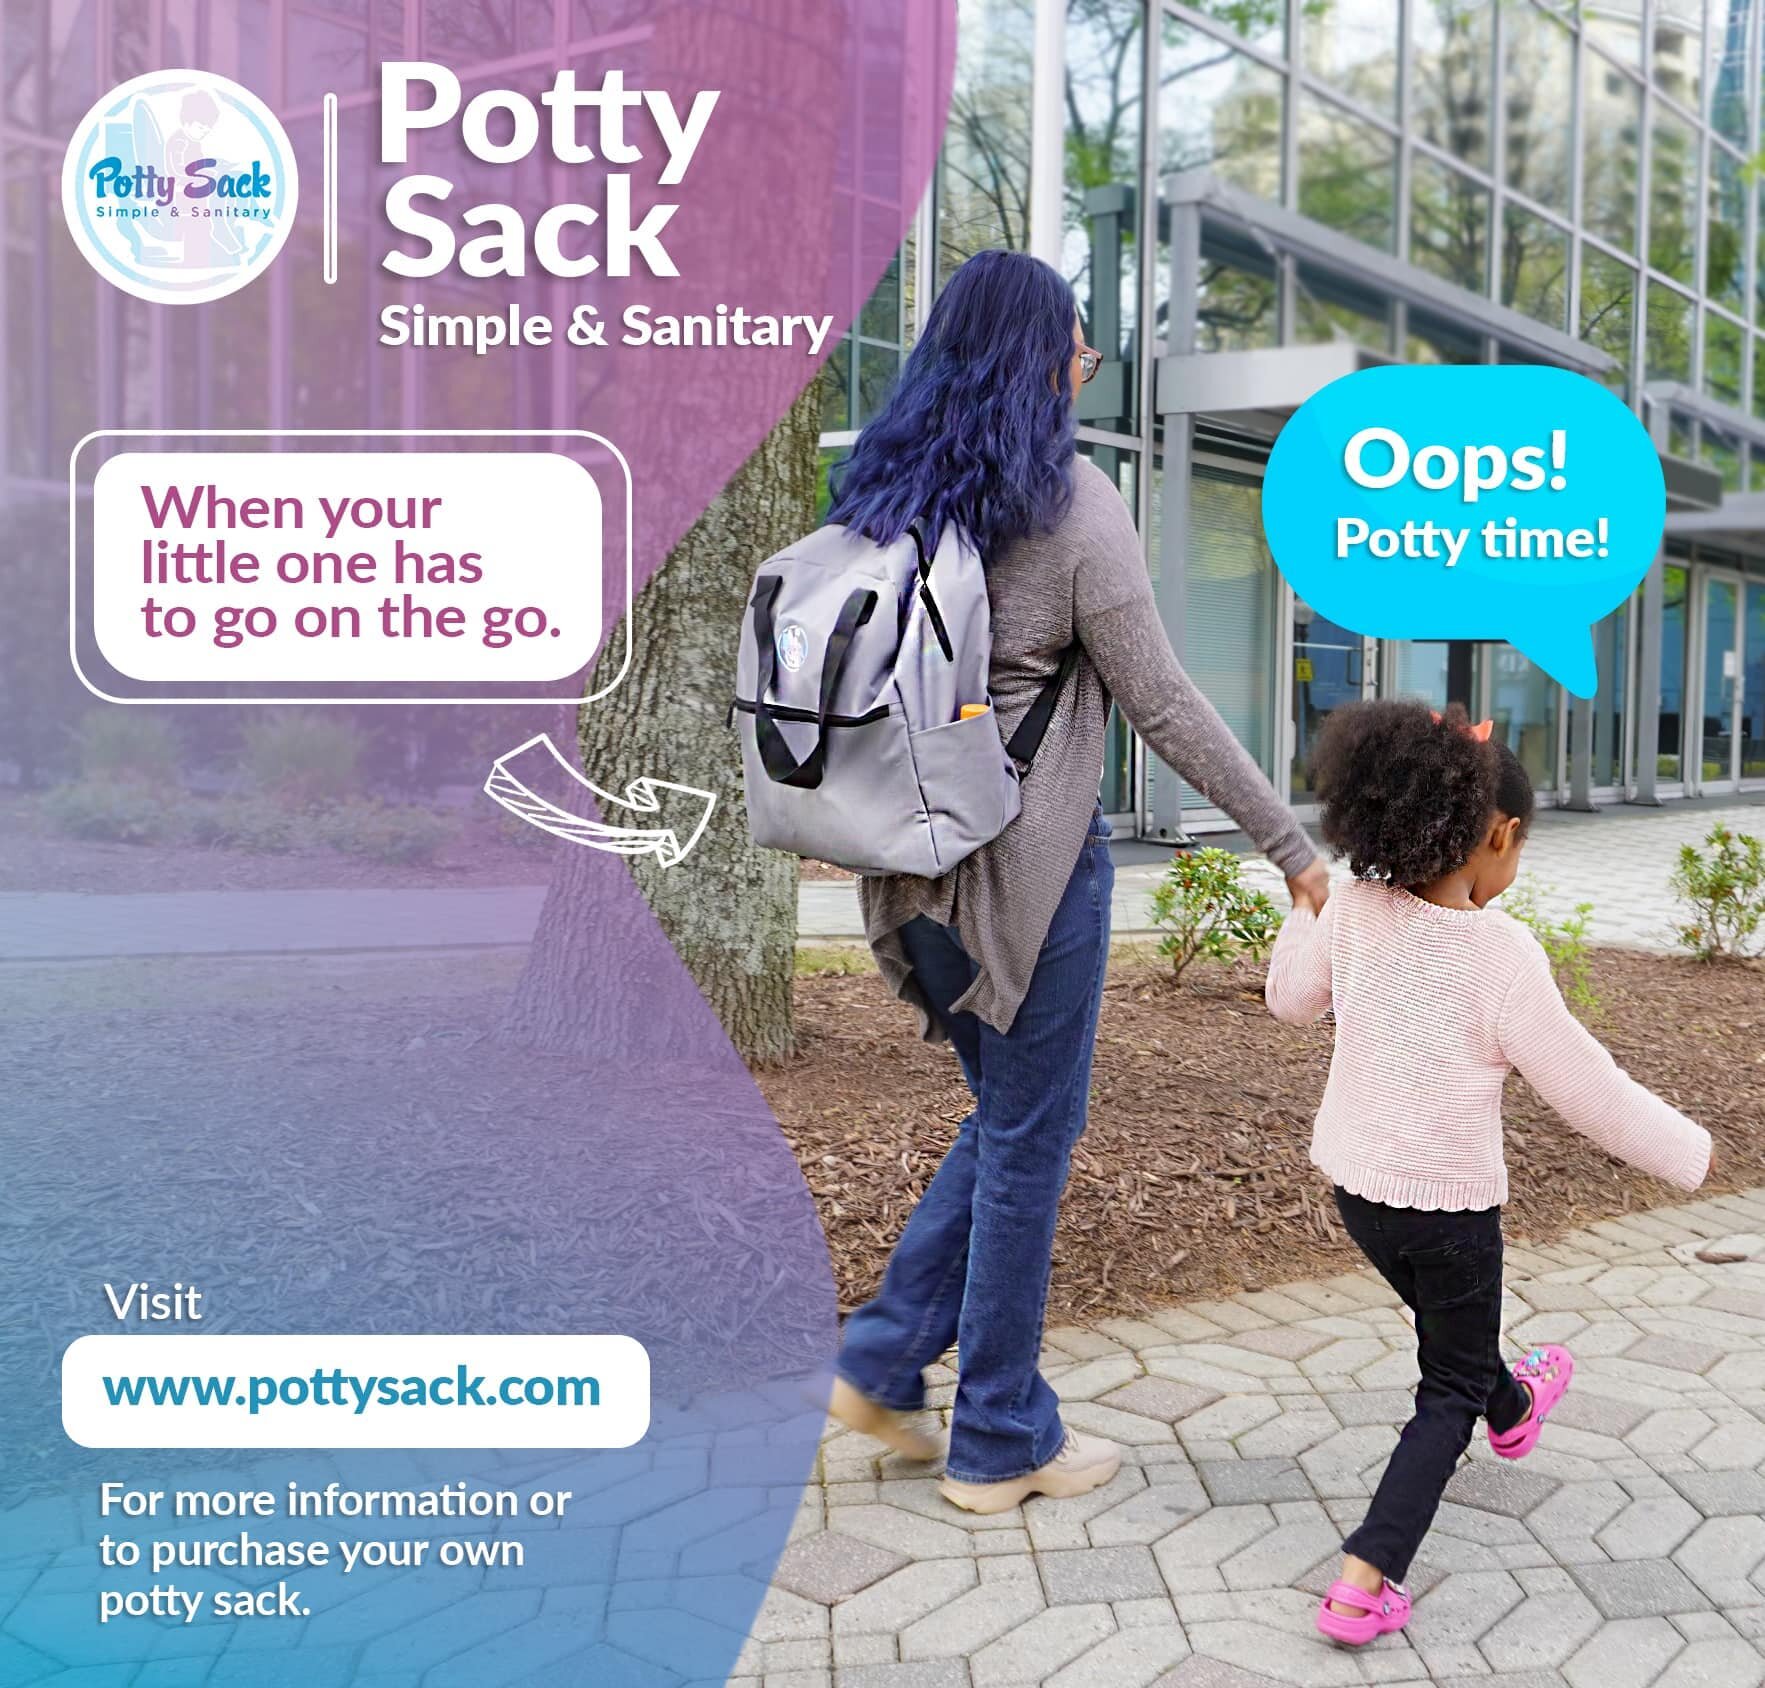 Carry it on your Shoulder or on your Back!

Check out Potty Sacks Link in bio!
www.pottysacks.com